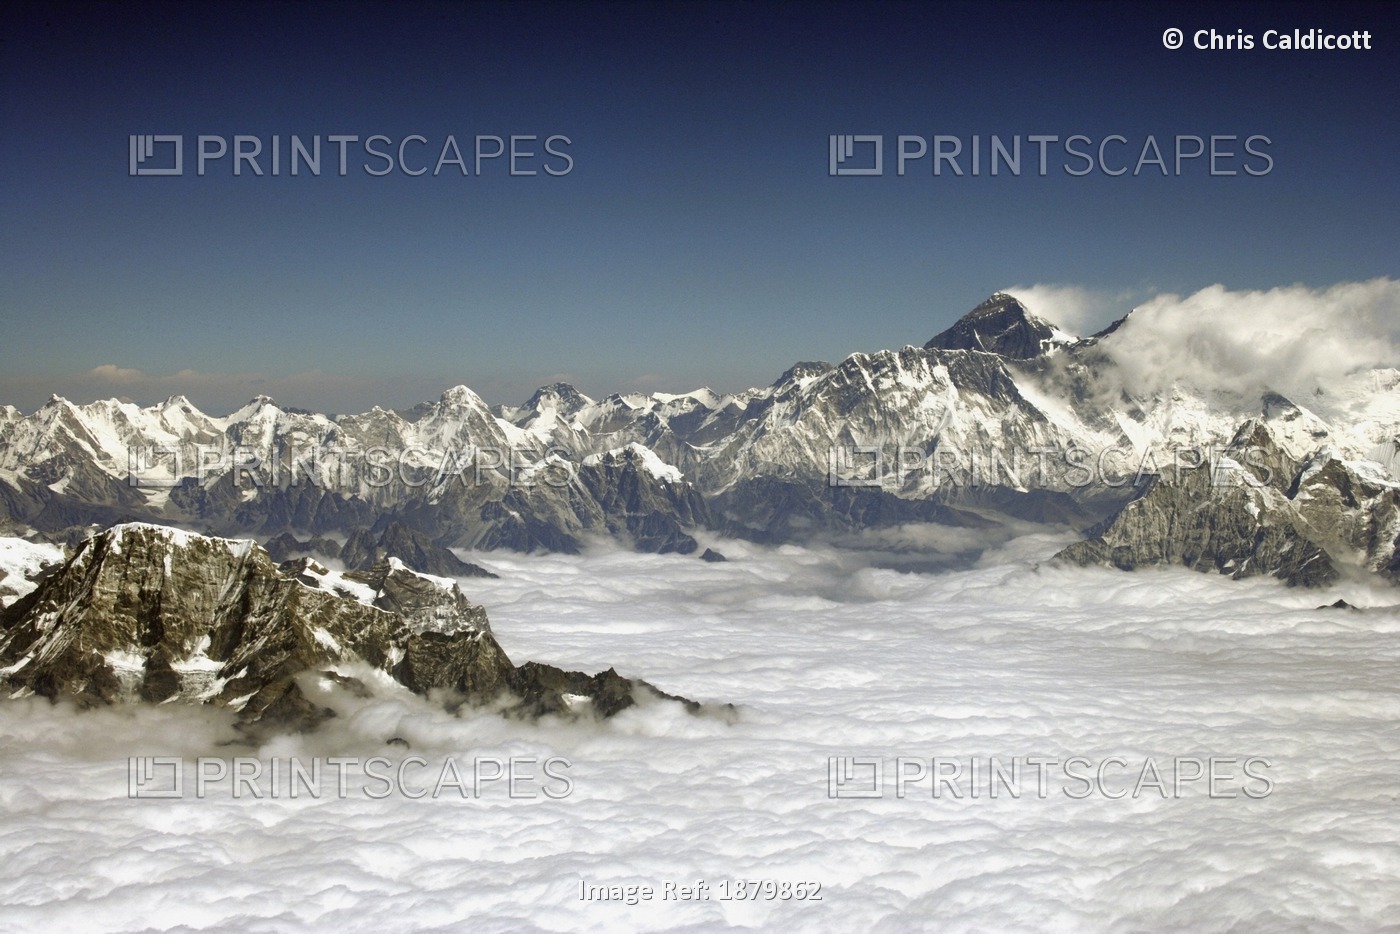 Aerial View Of Mount Everest